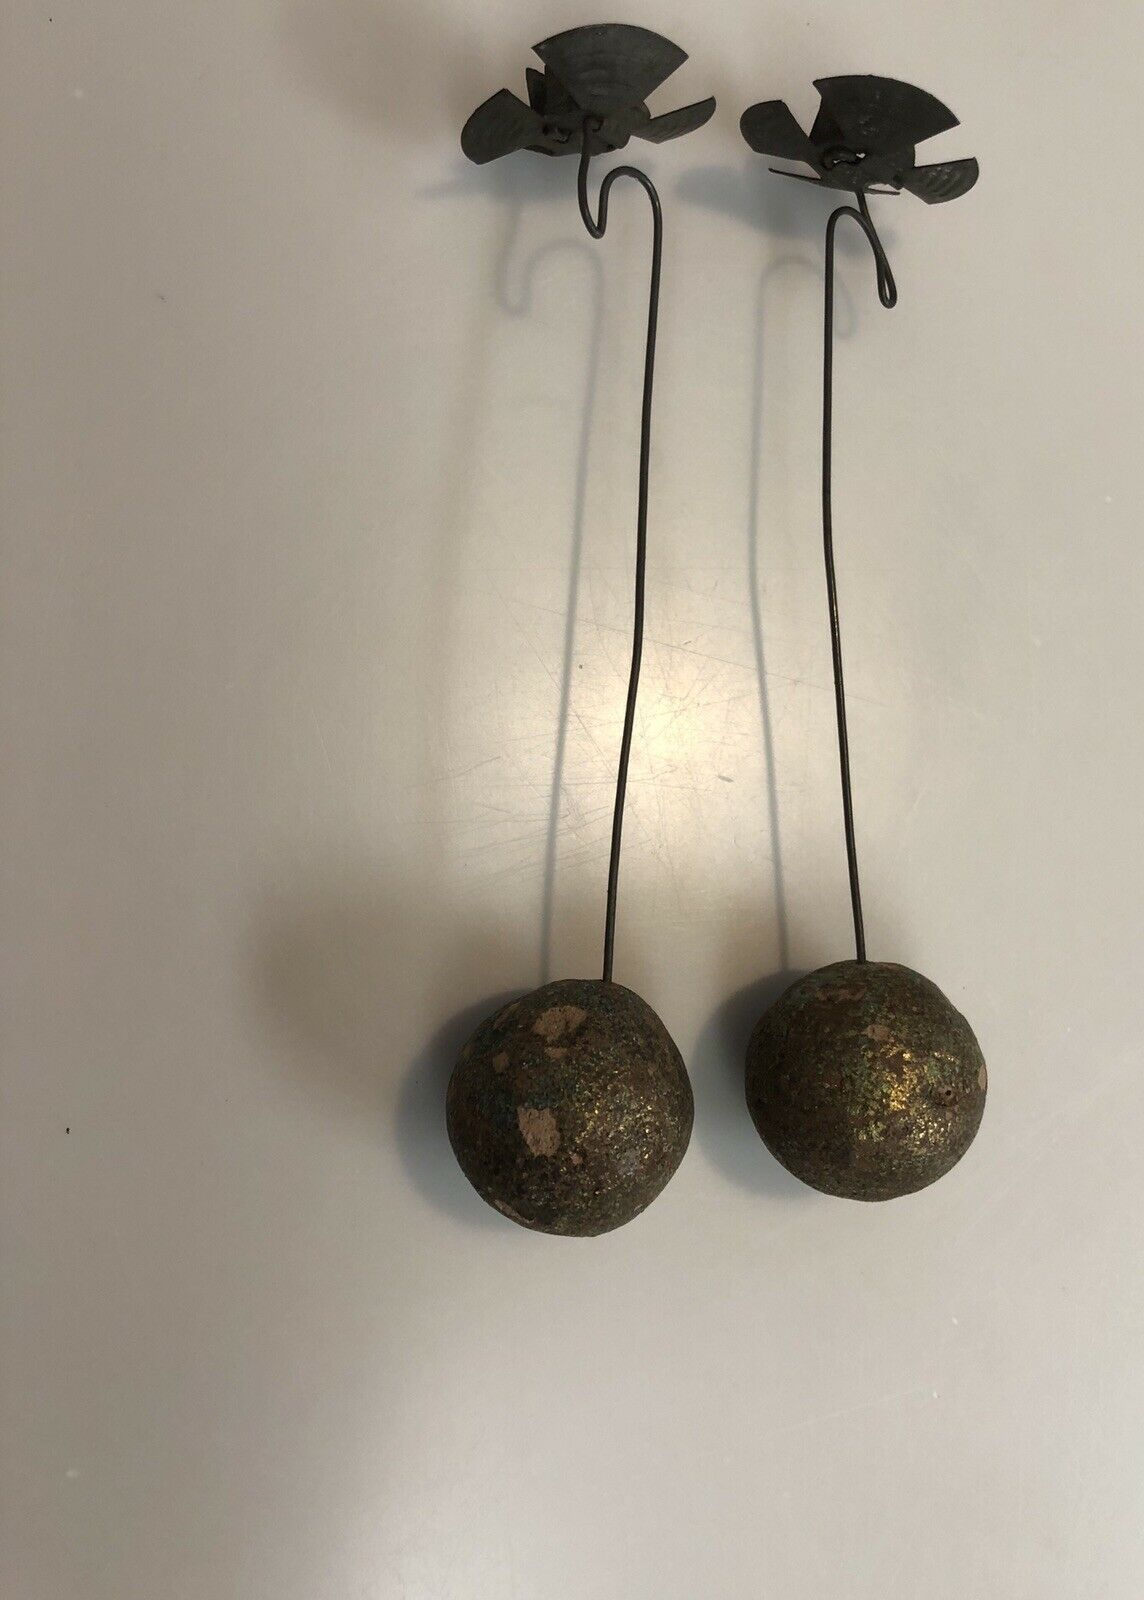 2 Vintage Christmas Tree Candle Holders With Balance Weight.